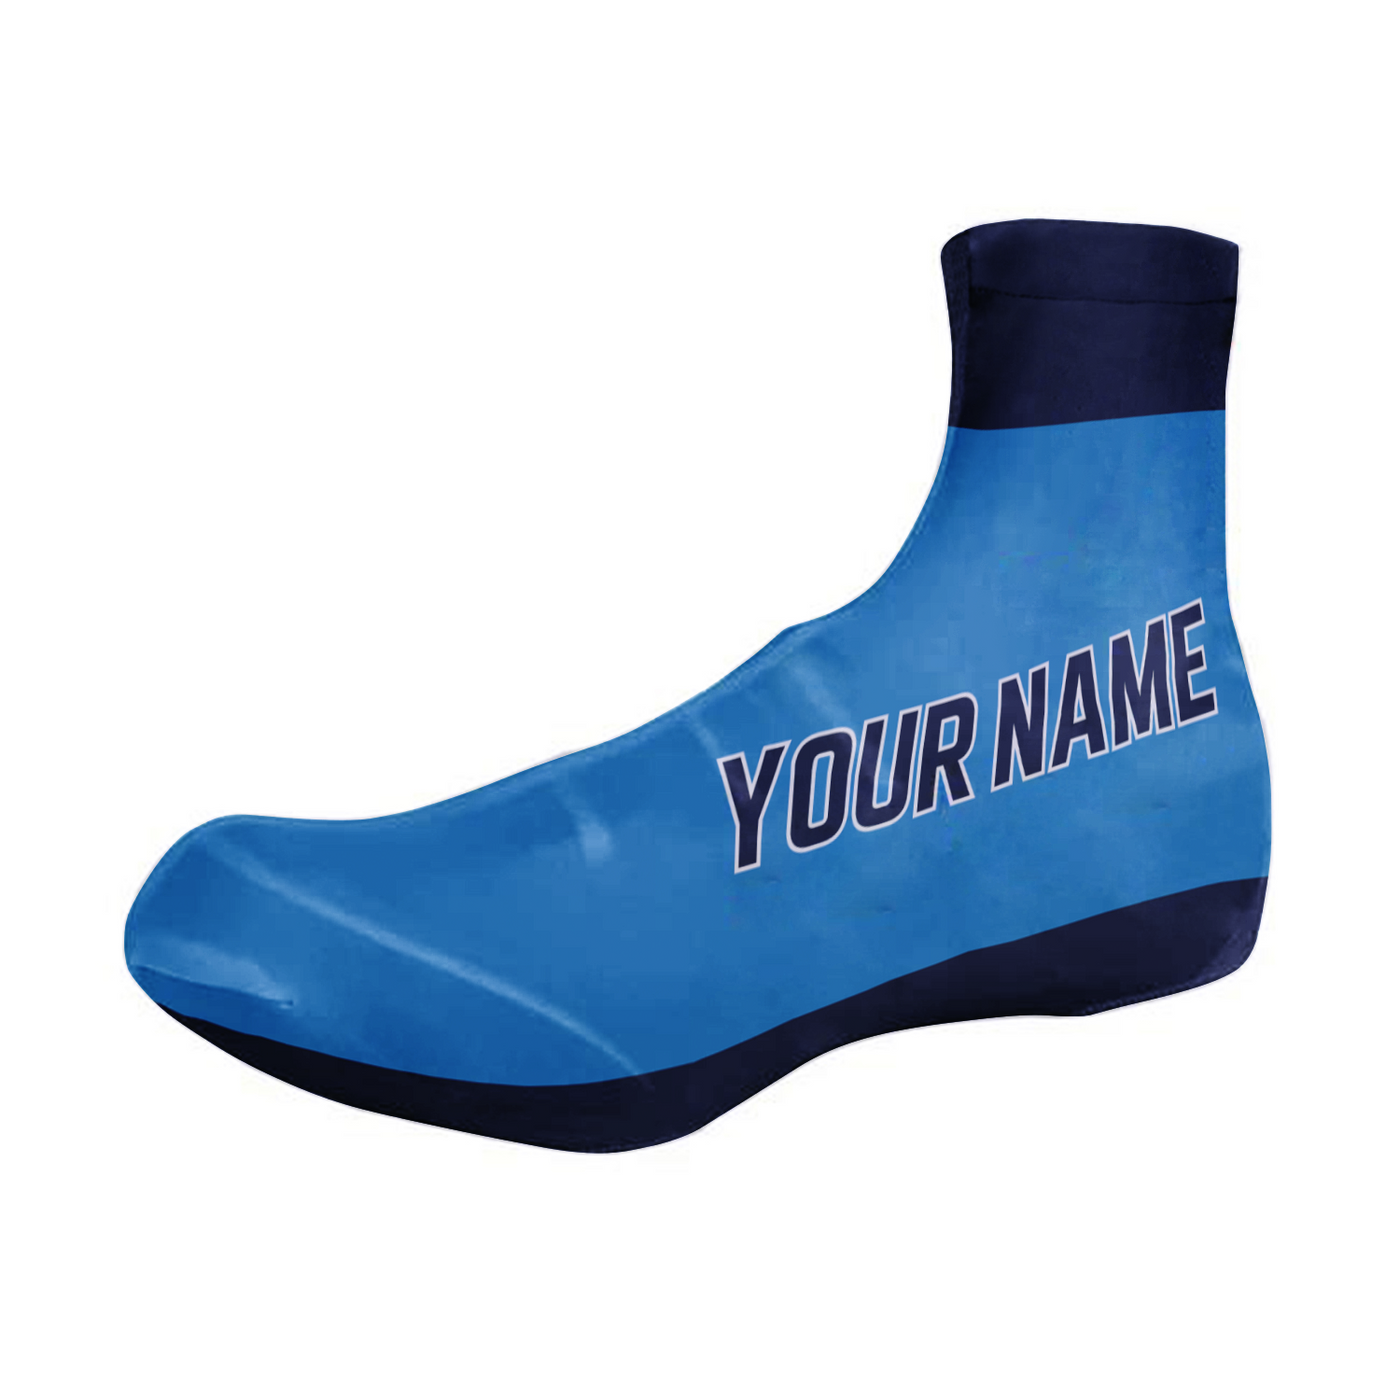 Customized Tennessee Team Cycling Shoe Covers